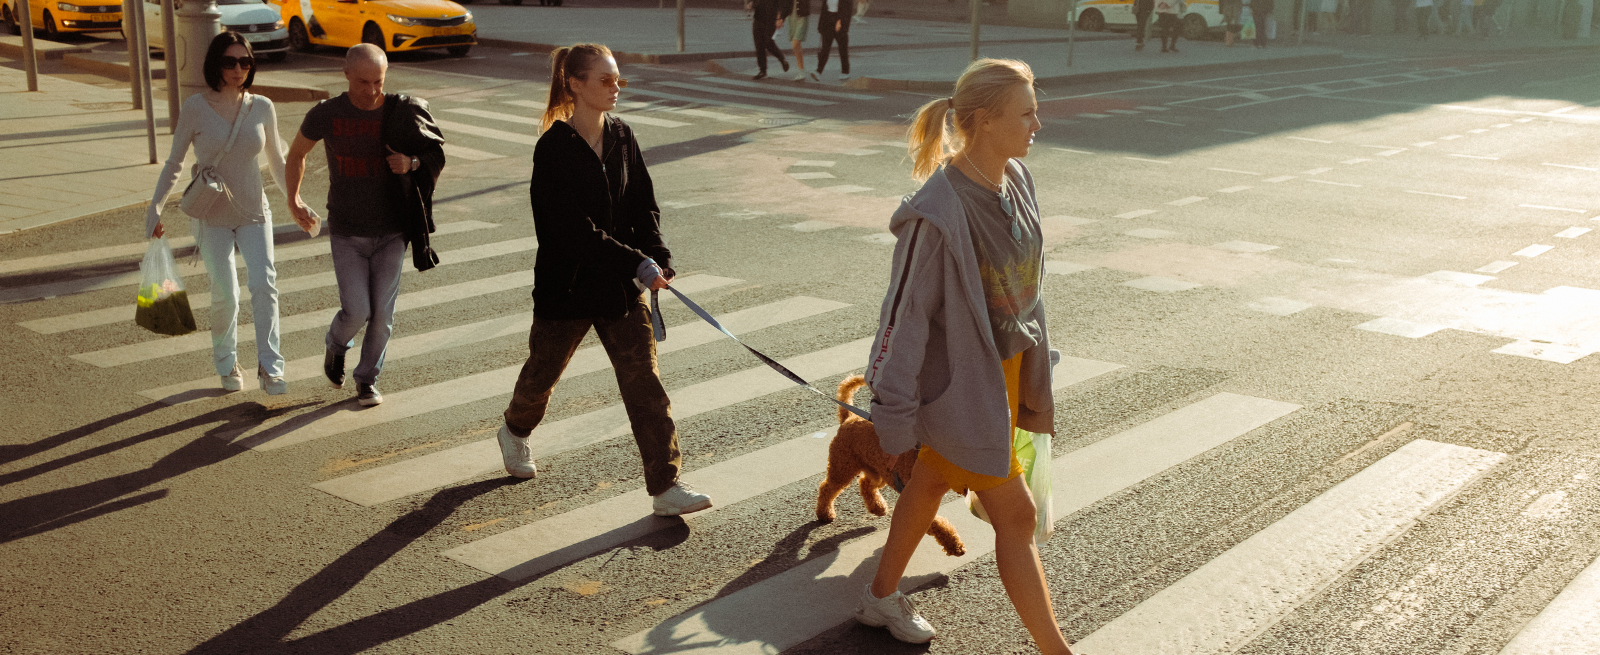 pedestrian crossover with people and a dog crossing